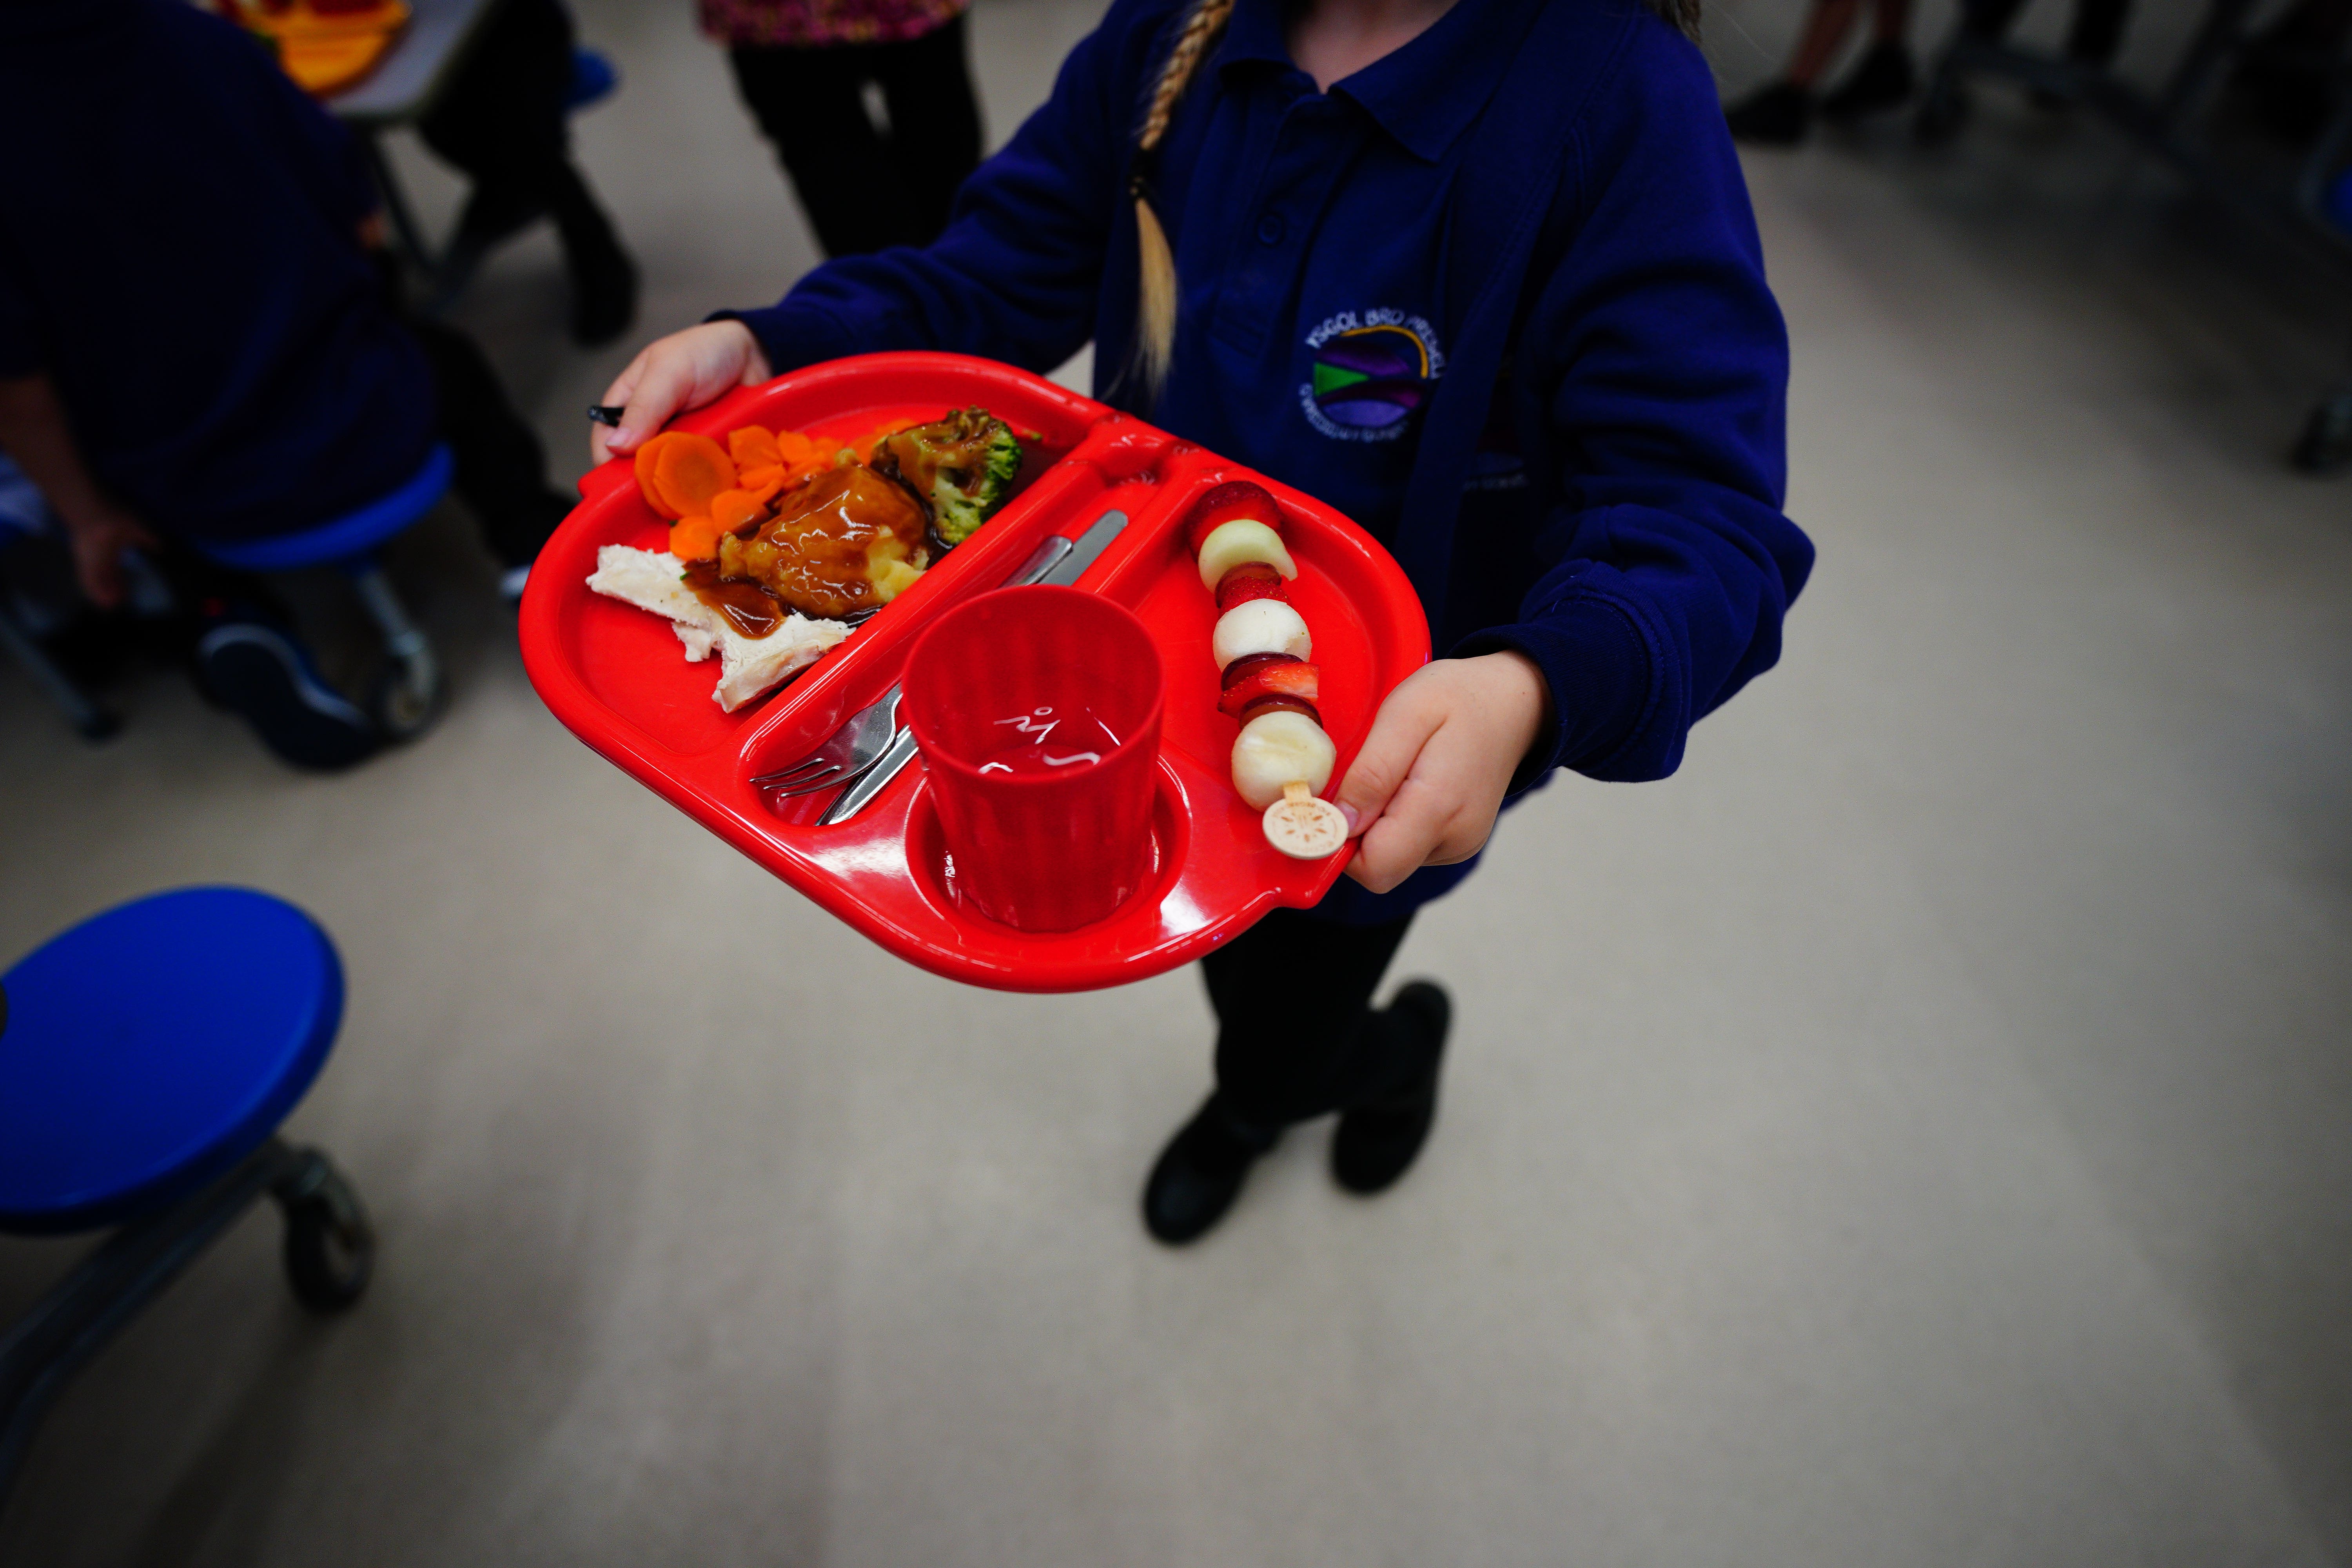 School caterers have to meet mandatory food standards set by the government